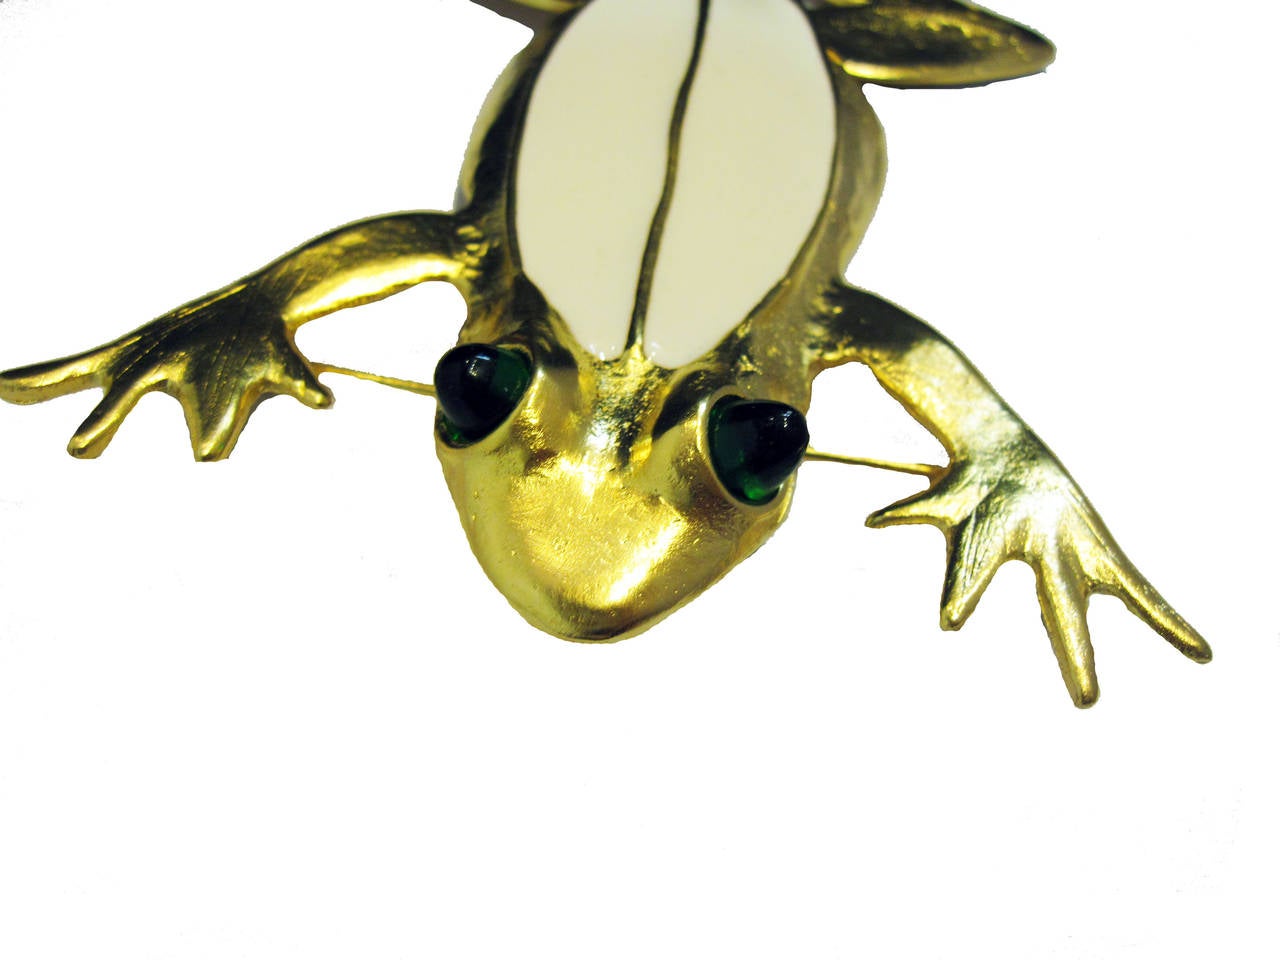 This frog is articulated and Kenneth feels it belongs on the shoulder so the legs hang on the other side. I wore it in the middle of my blouse and it sure got a lot of attention. This is a large white enameled frog pin in a light gold colored metal